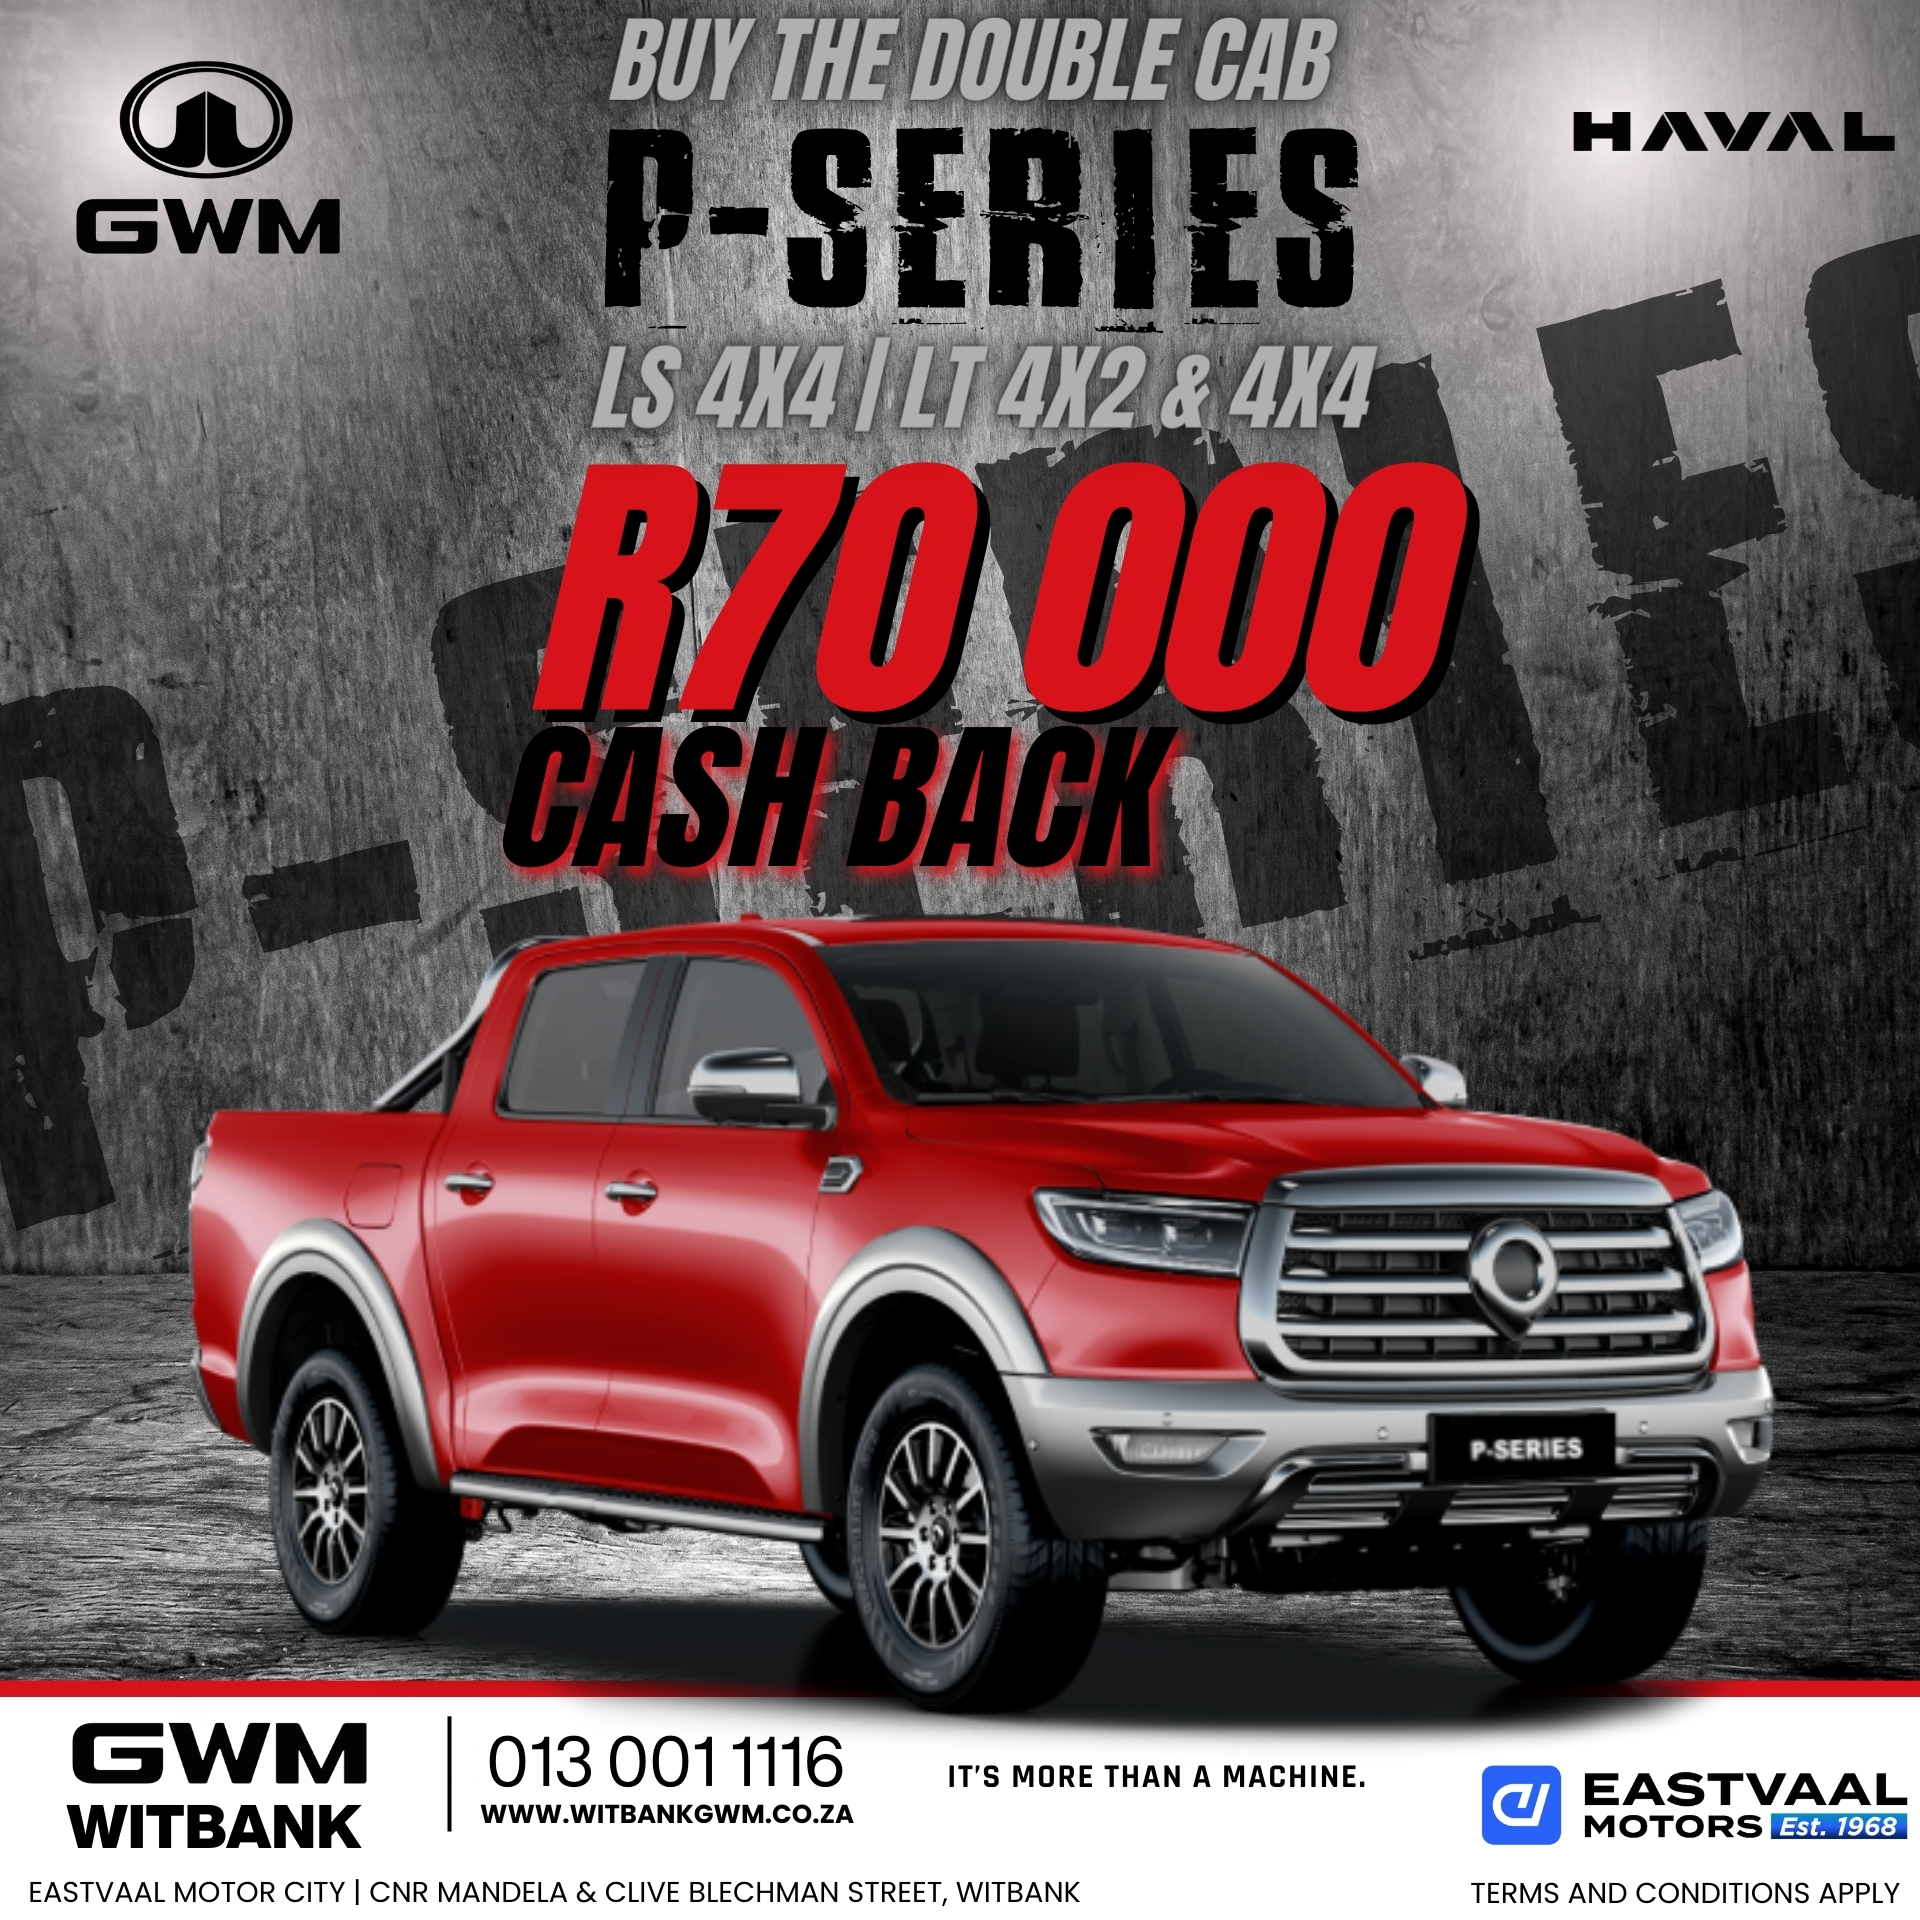 This July, explore new horizons in style with Haval GWM. Visit us for exclusive deals! image from 